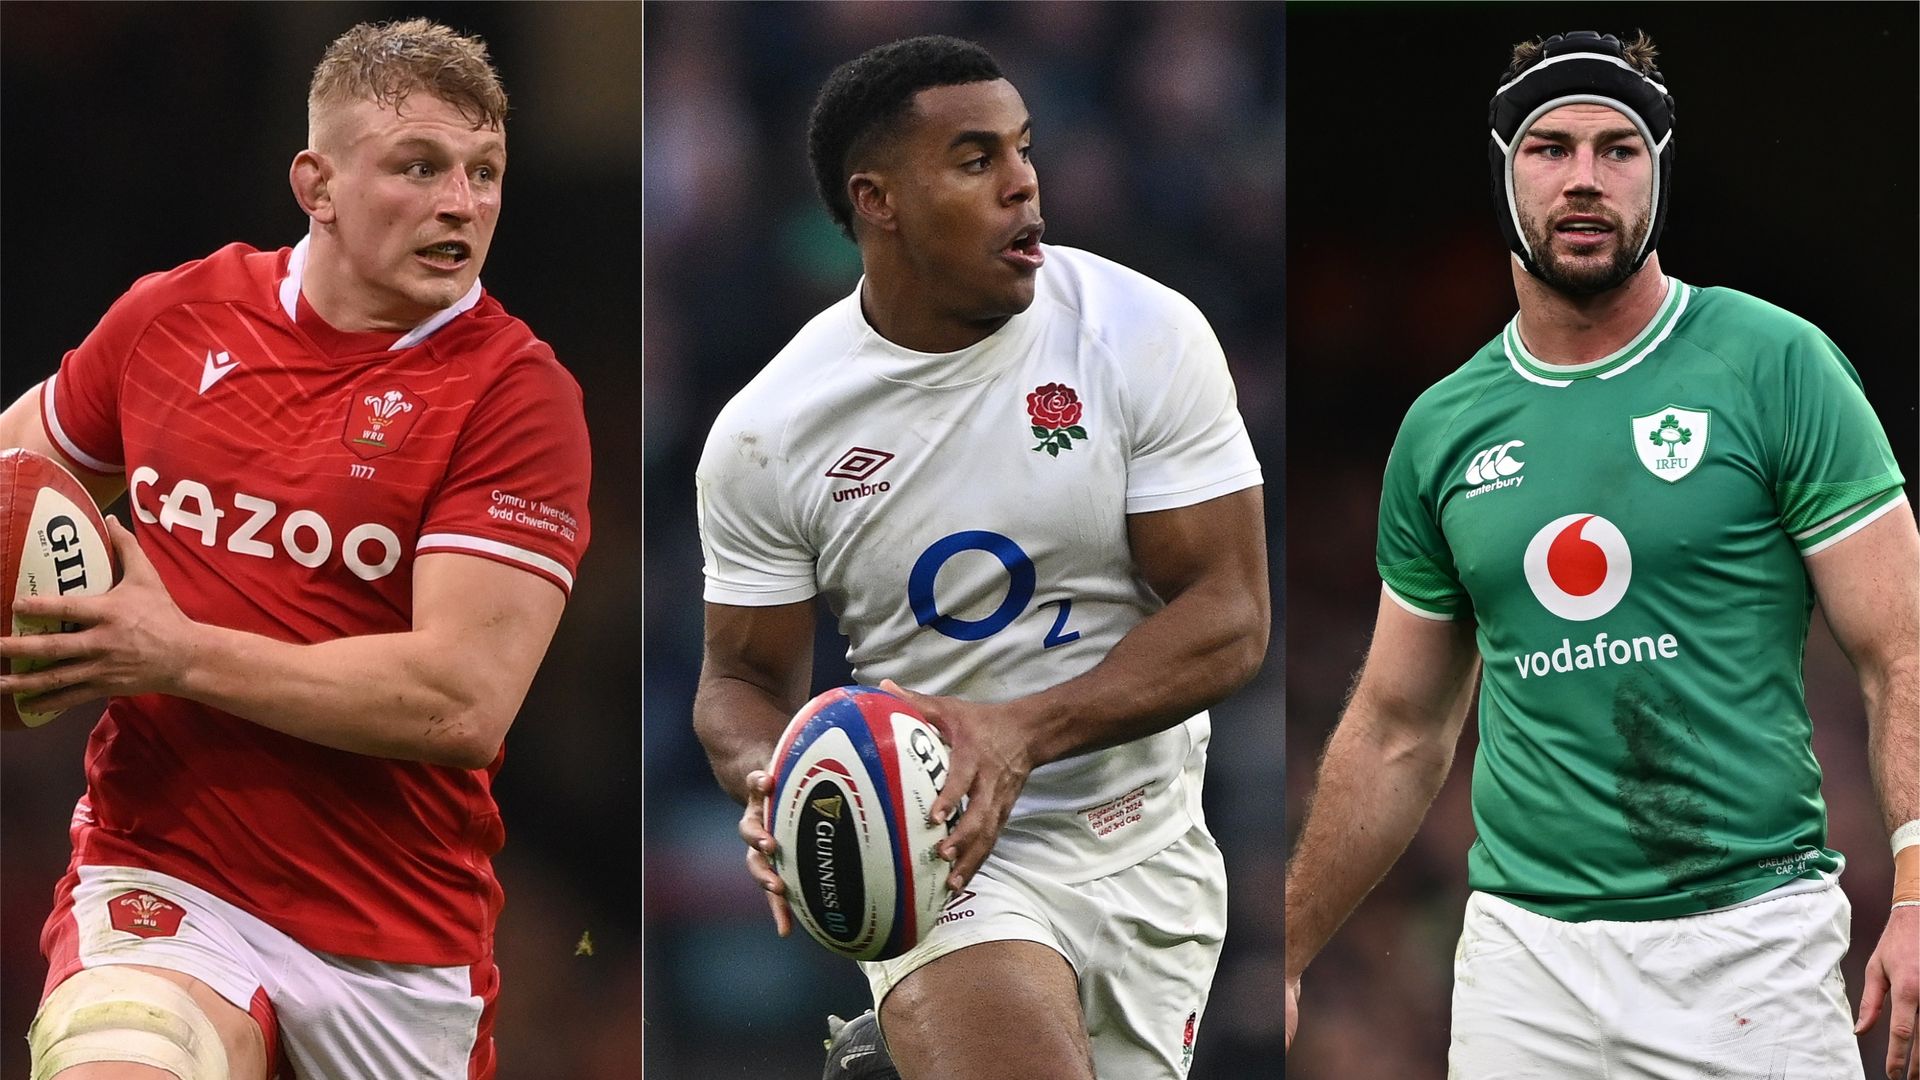 Rugby's summer: England take on All Blacks, Wales in Aus, Ireland battle Boks